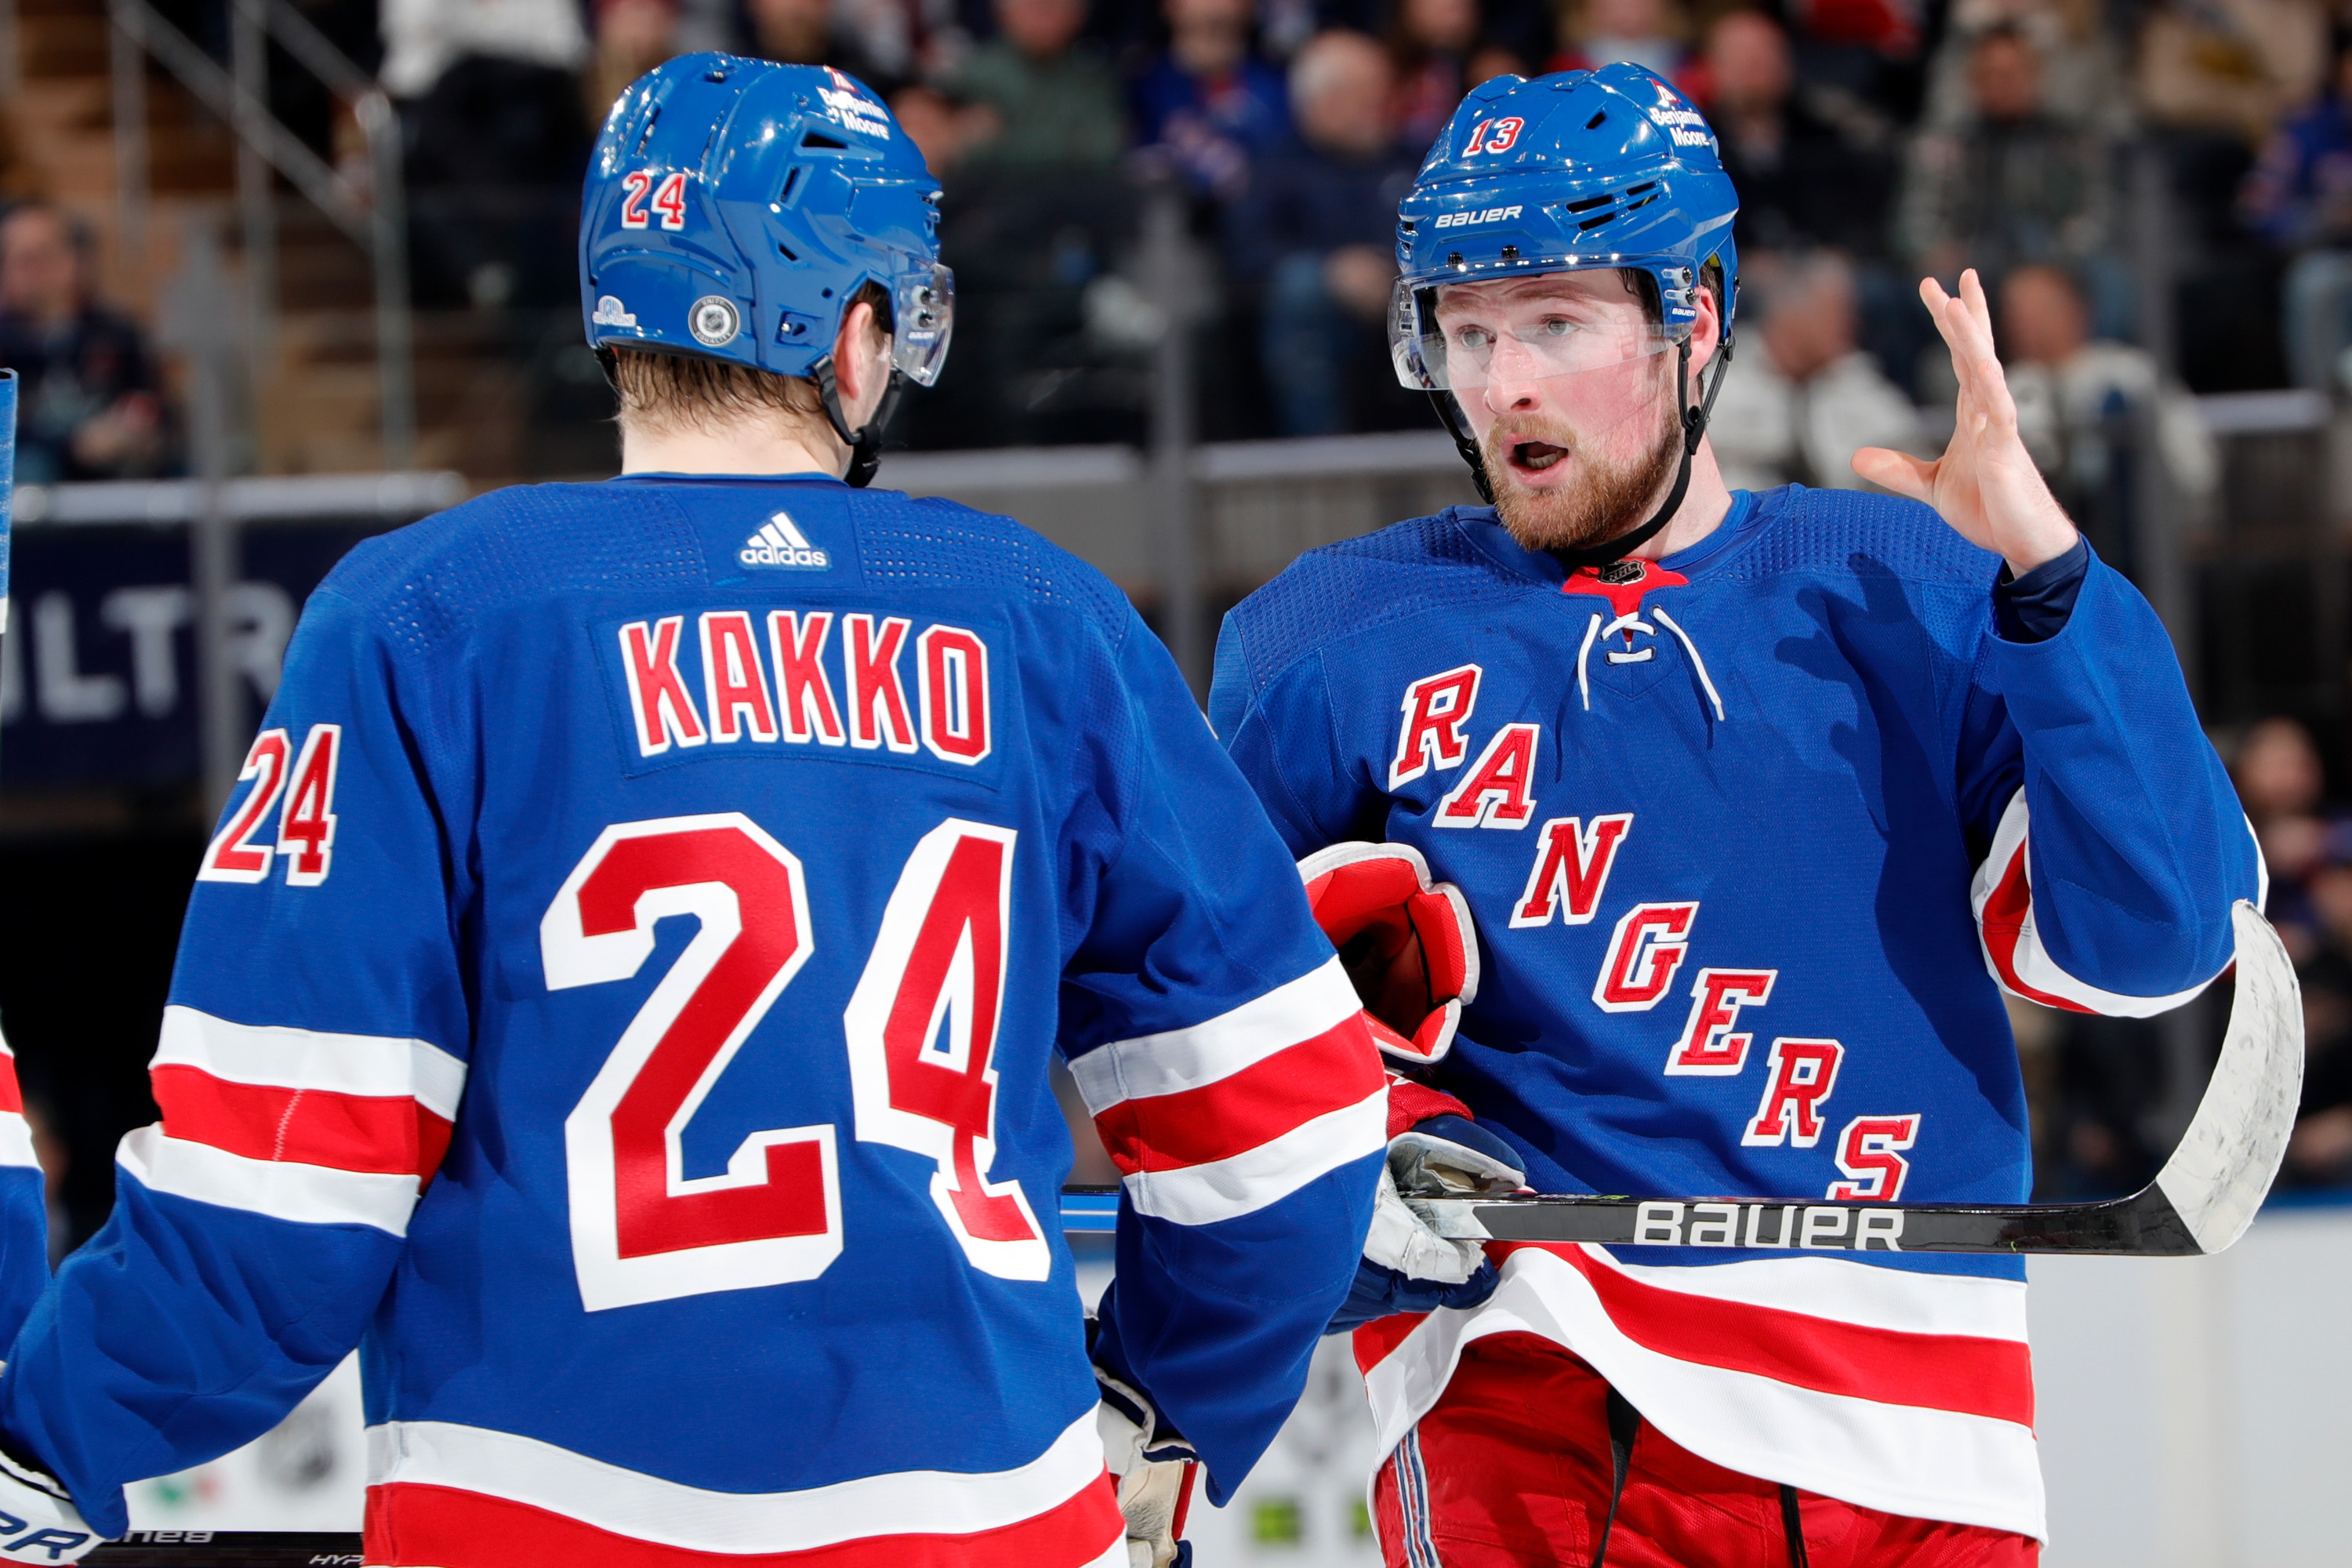 Chris Kreider reminding Rangers of his special teams excellence